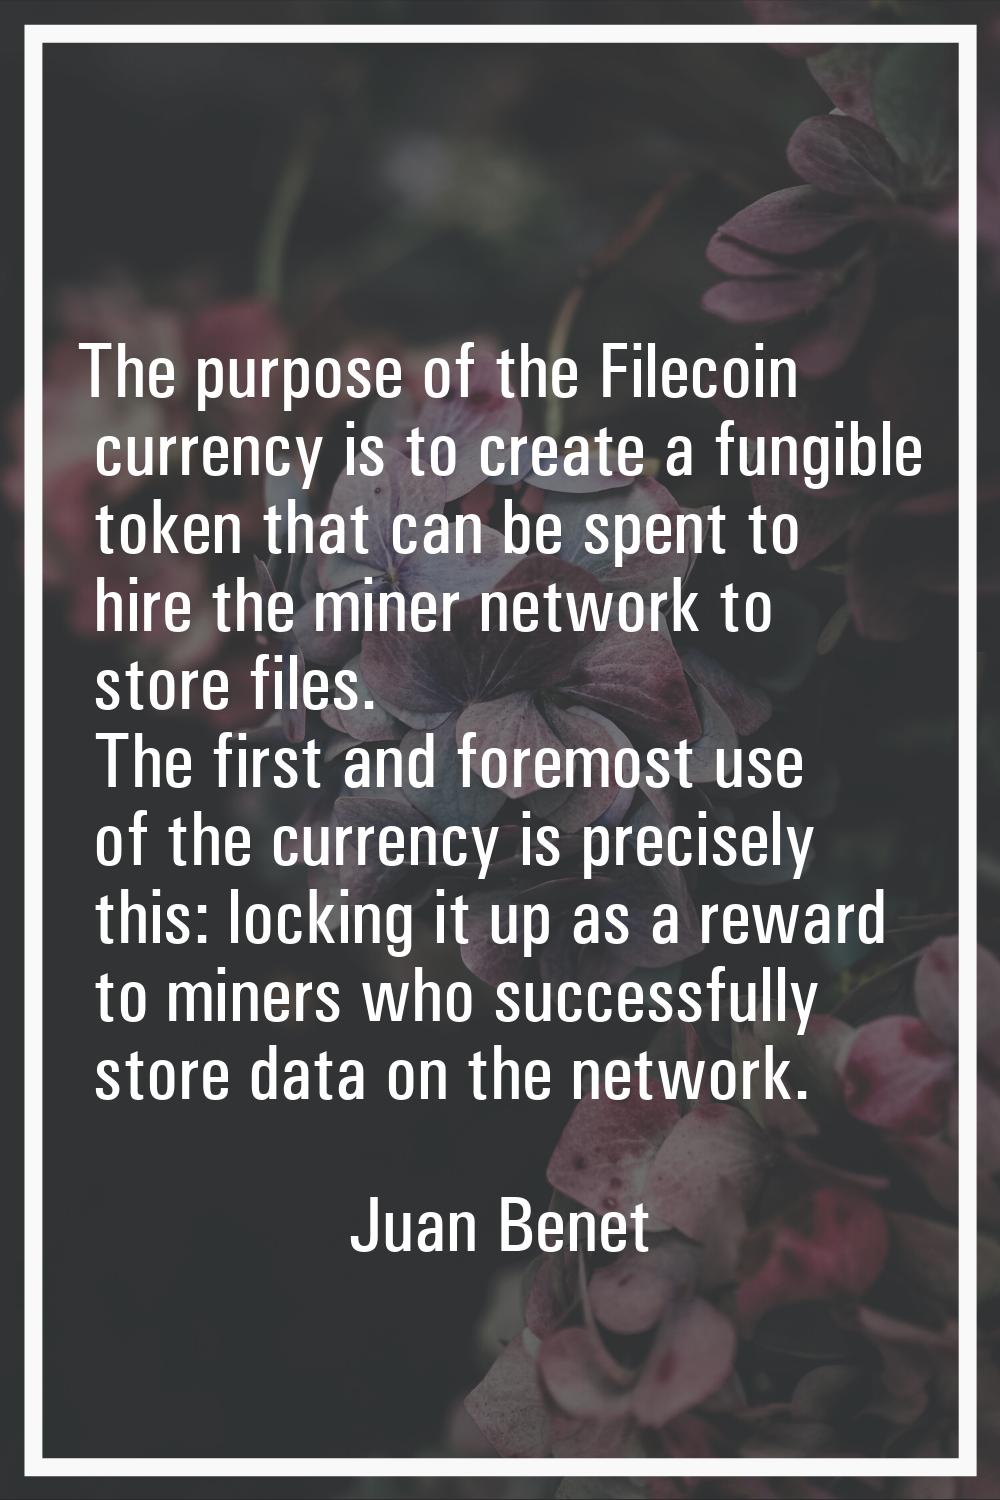 The purpose of the Filecoin currency is to create a fungible token that can be spent to hire the mi